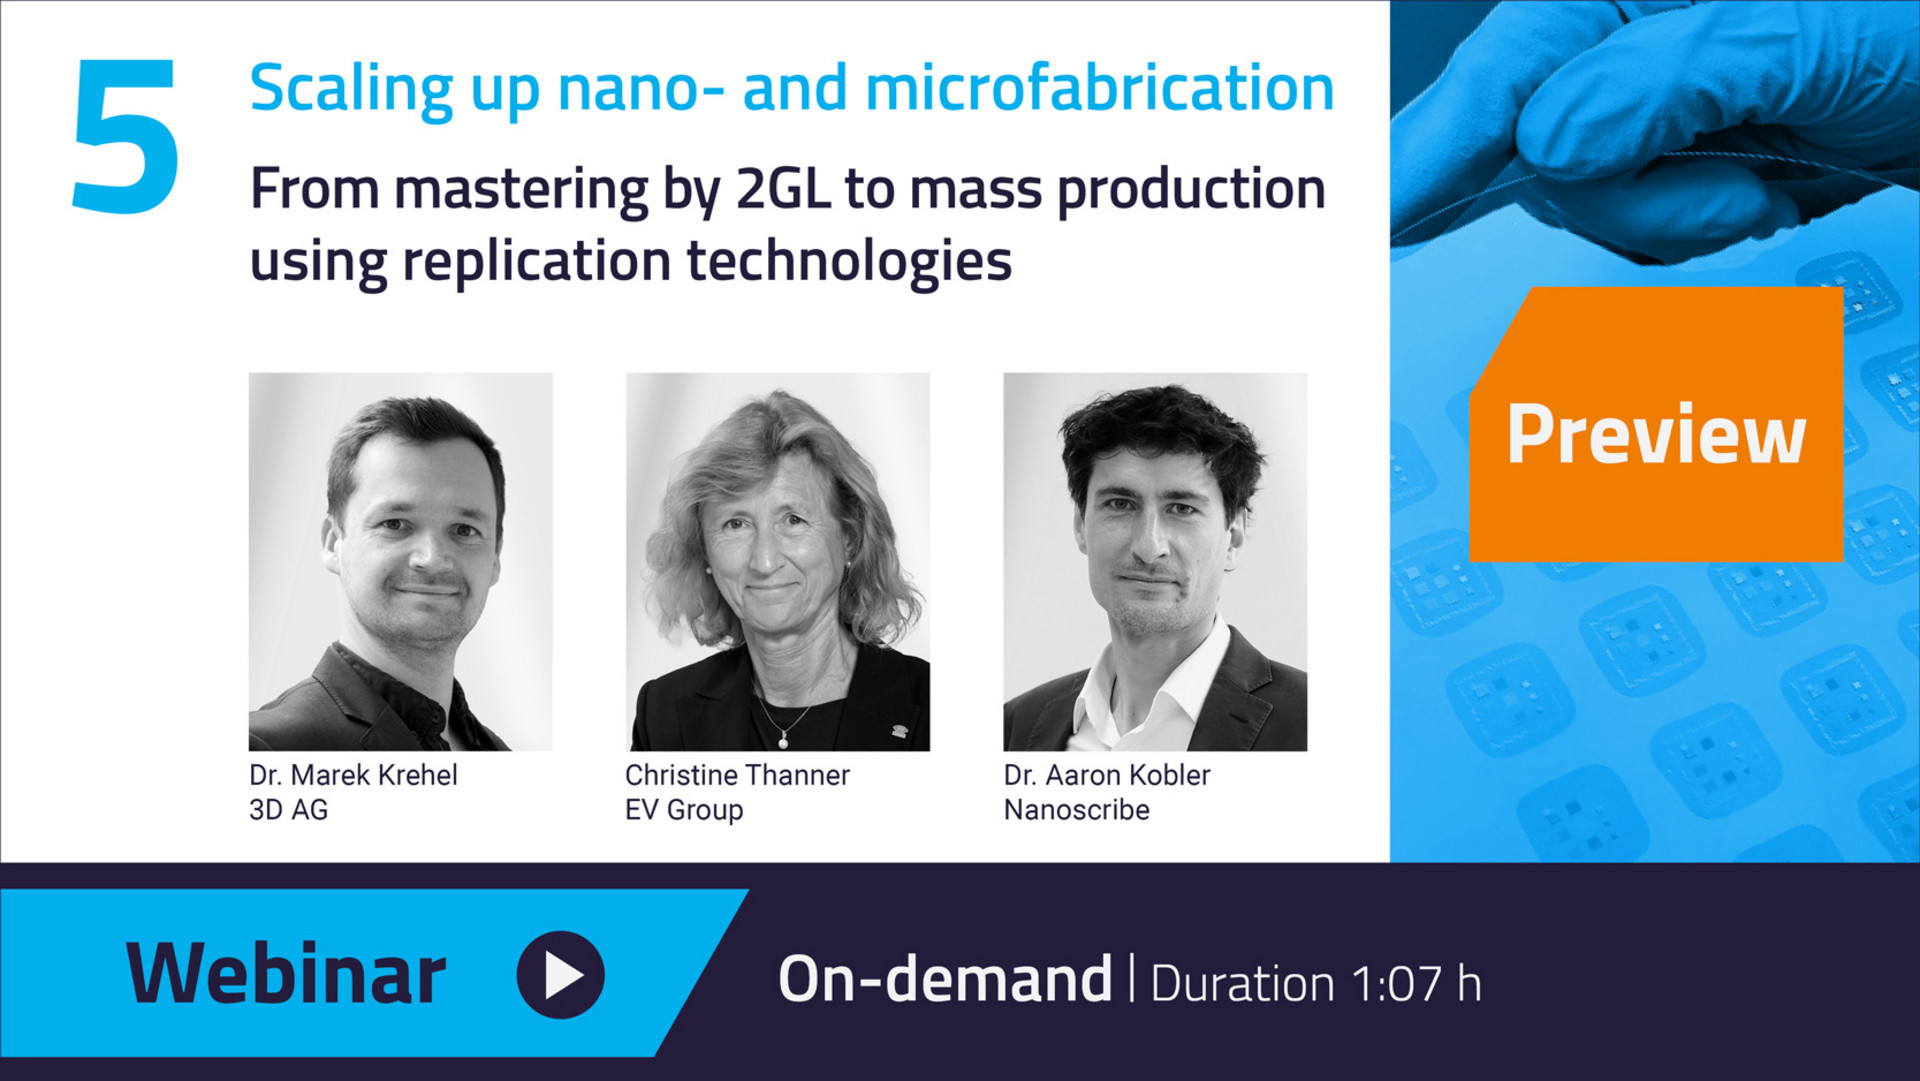 Our Webinar on Scaling up nano- and microfabrication is now available on-demand - watch the webinar here